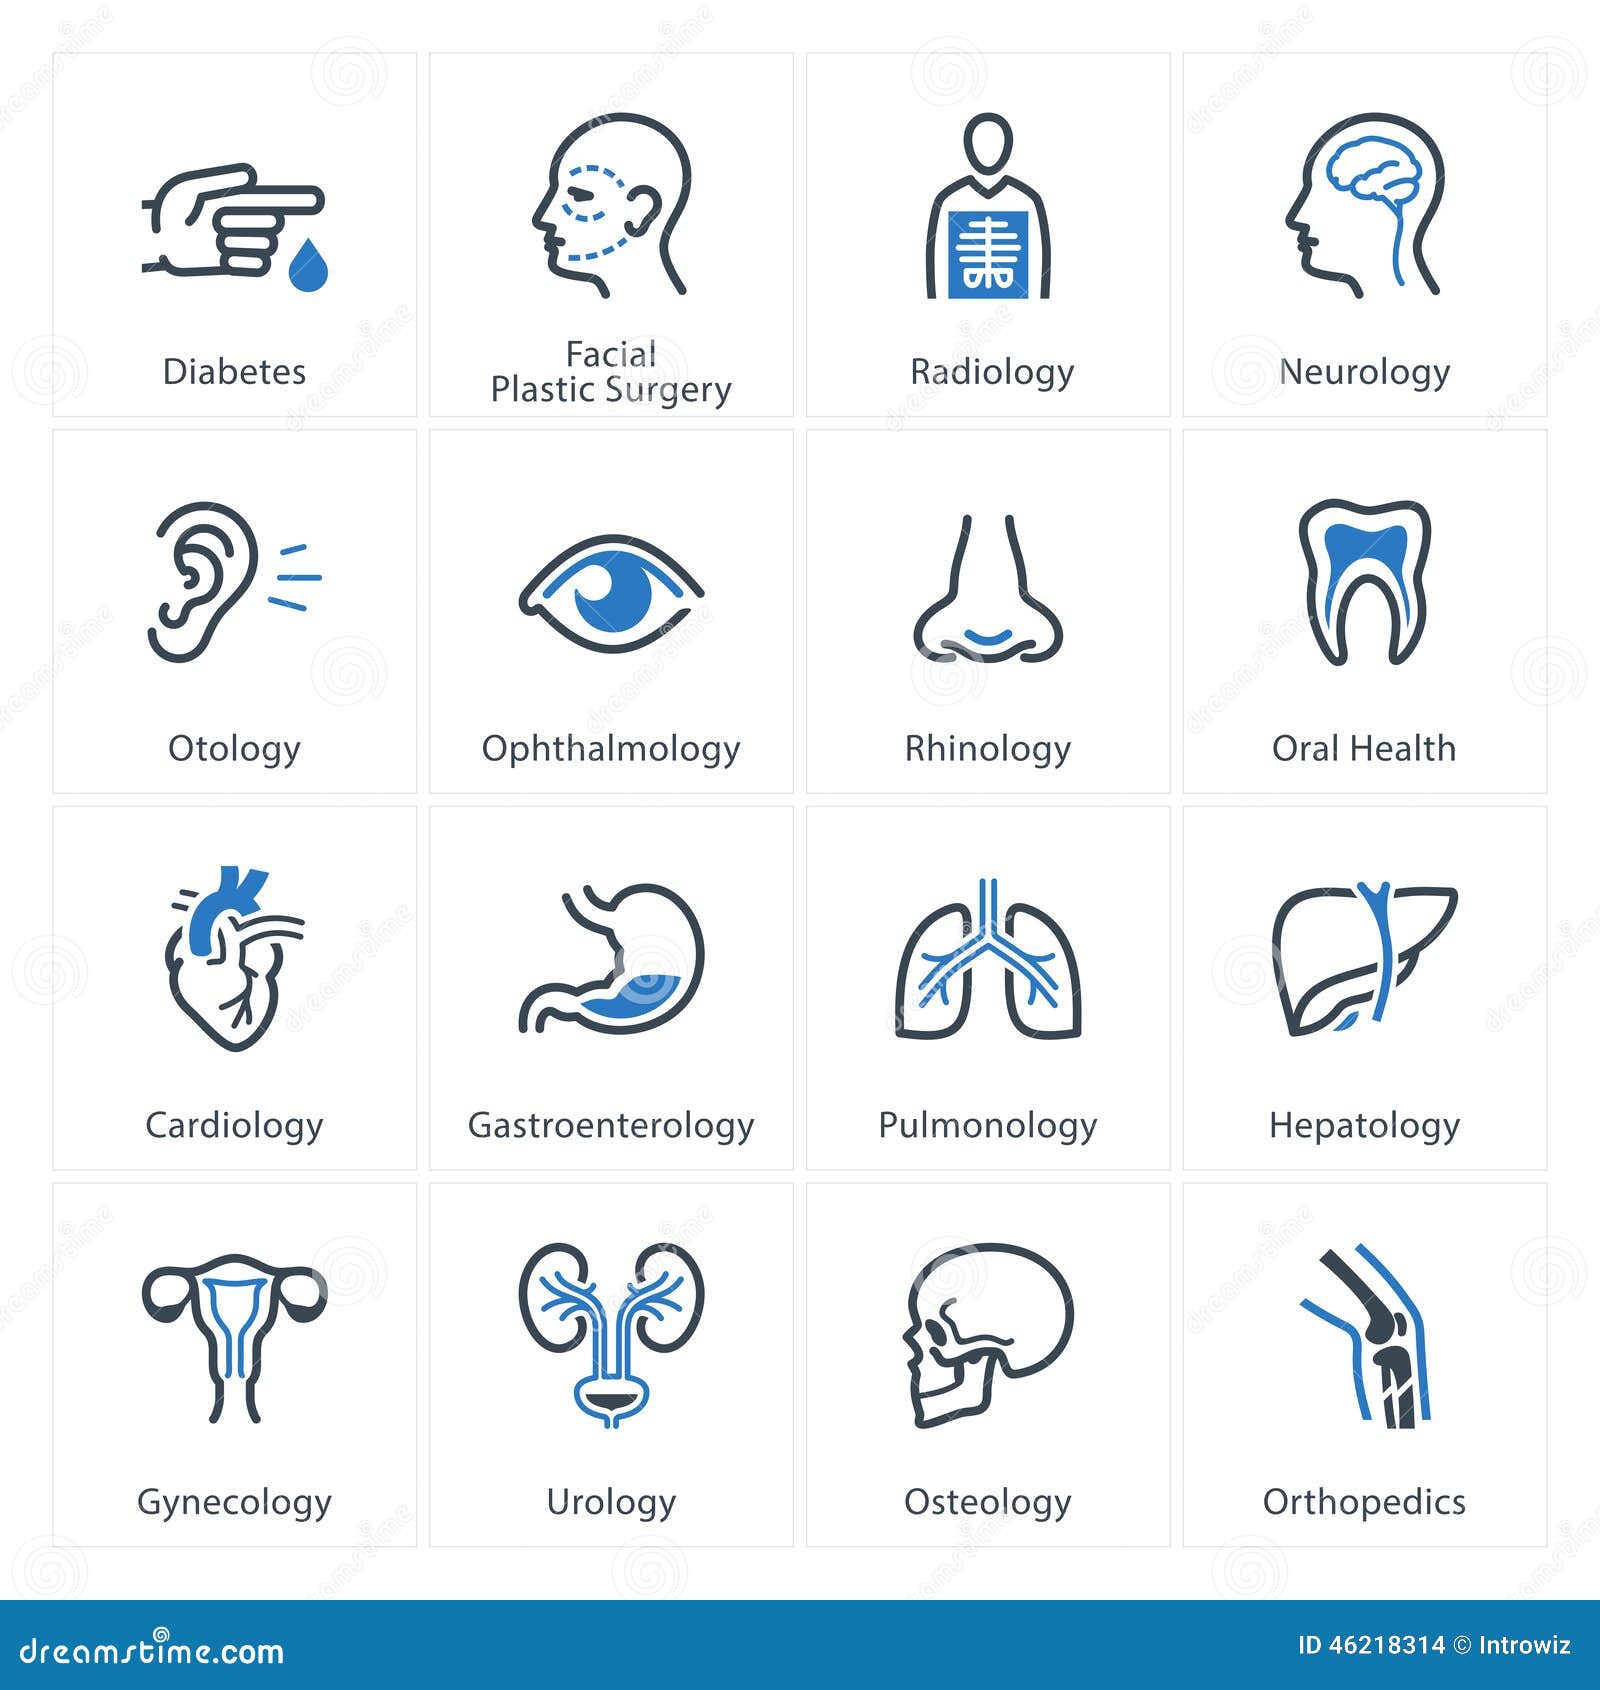 medical & health care icons set 1 - specialties